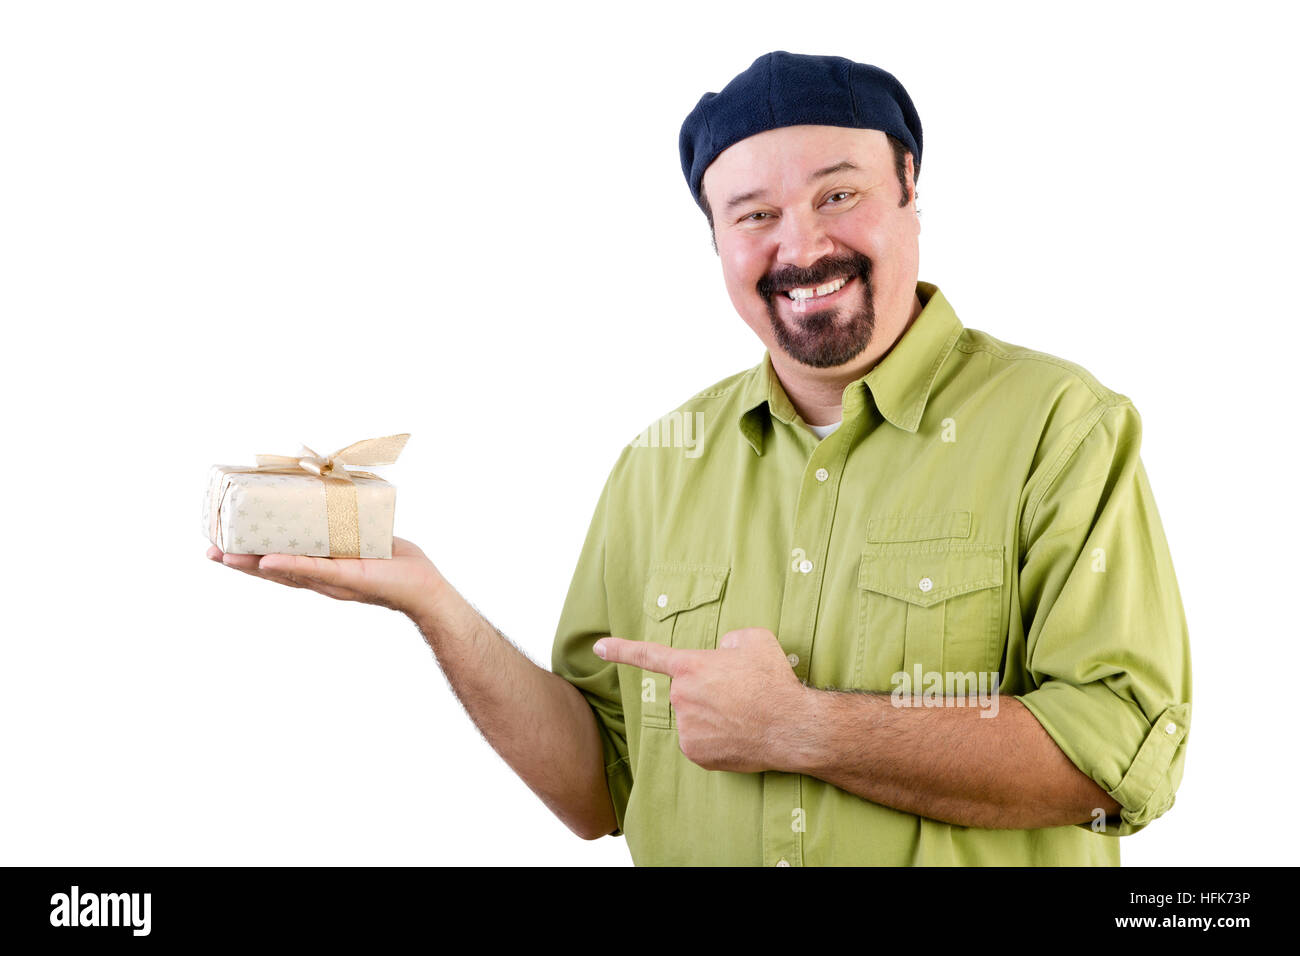 Smiling middle aged man in French beret holding wrapped gift on white Stock Photo